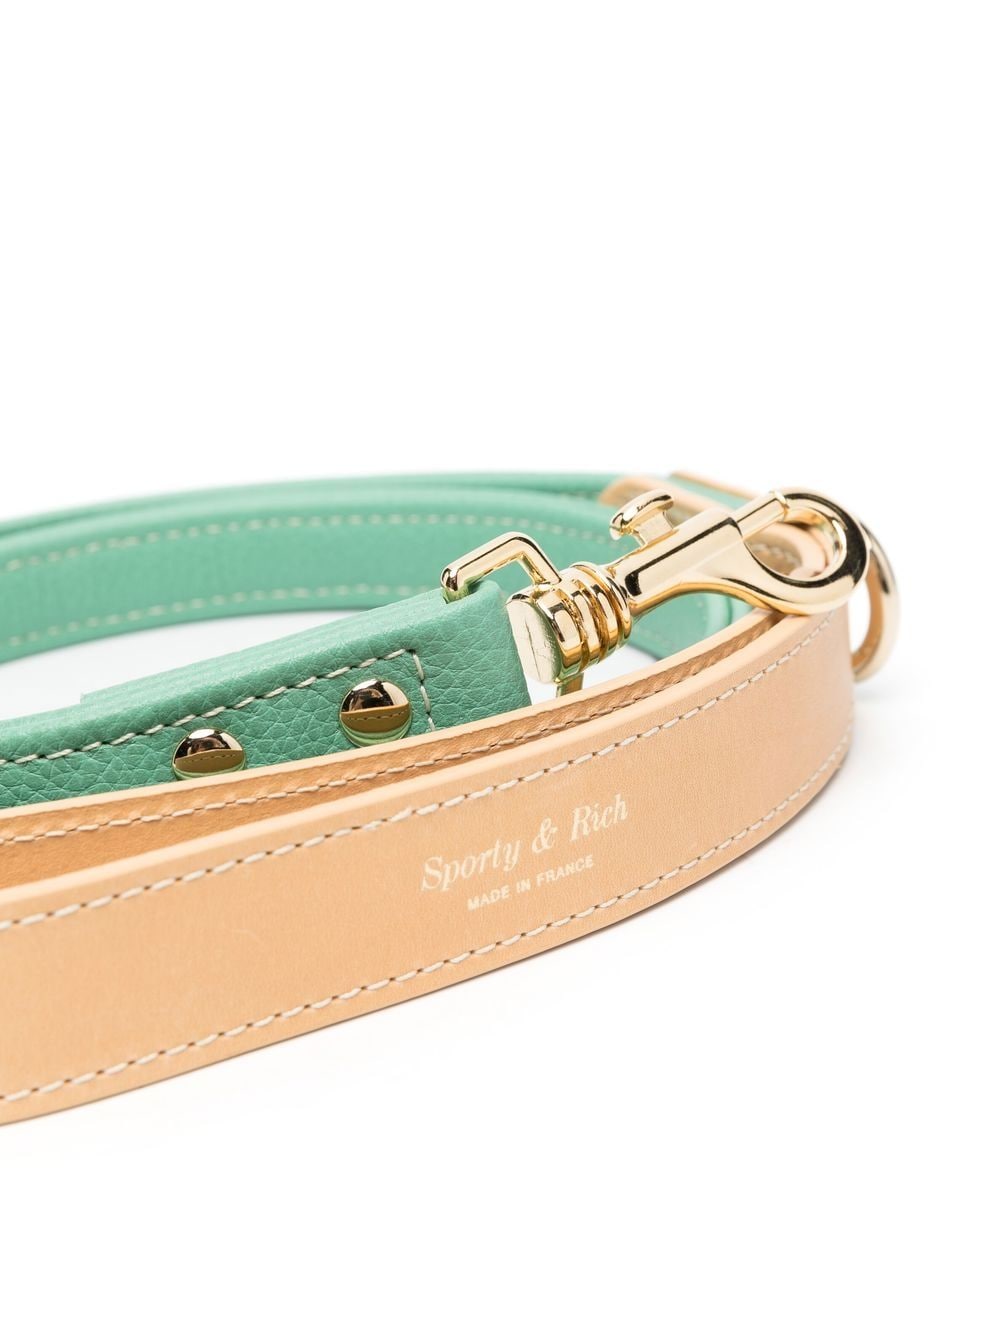 Image 2 of Sporty & Rich leather pet lead